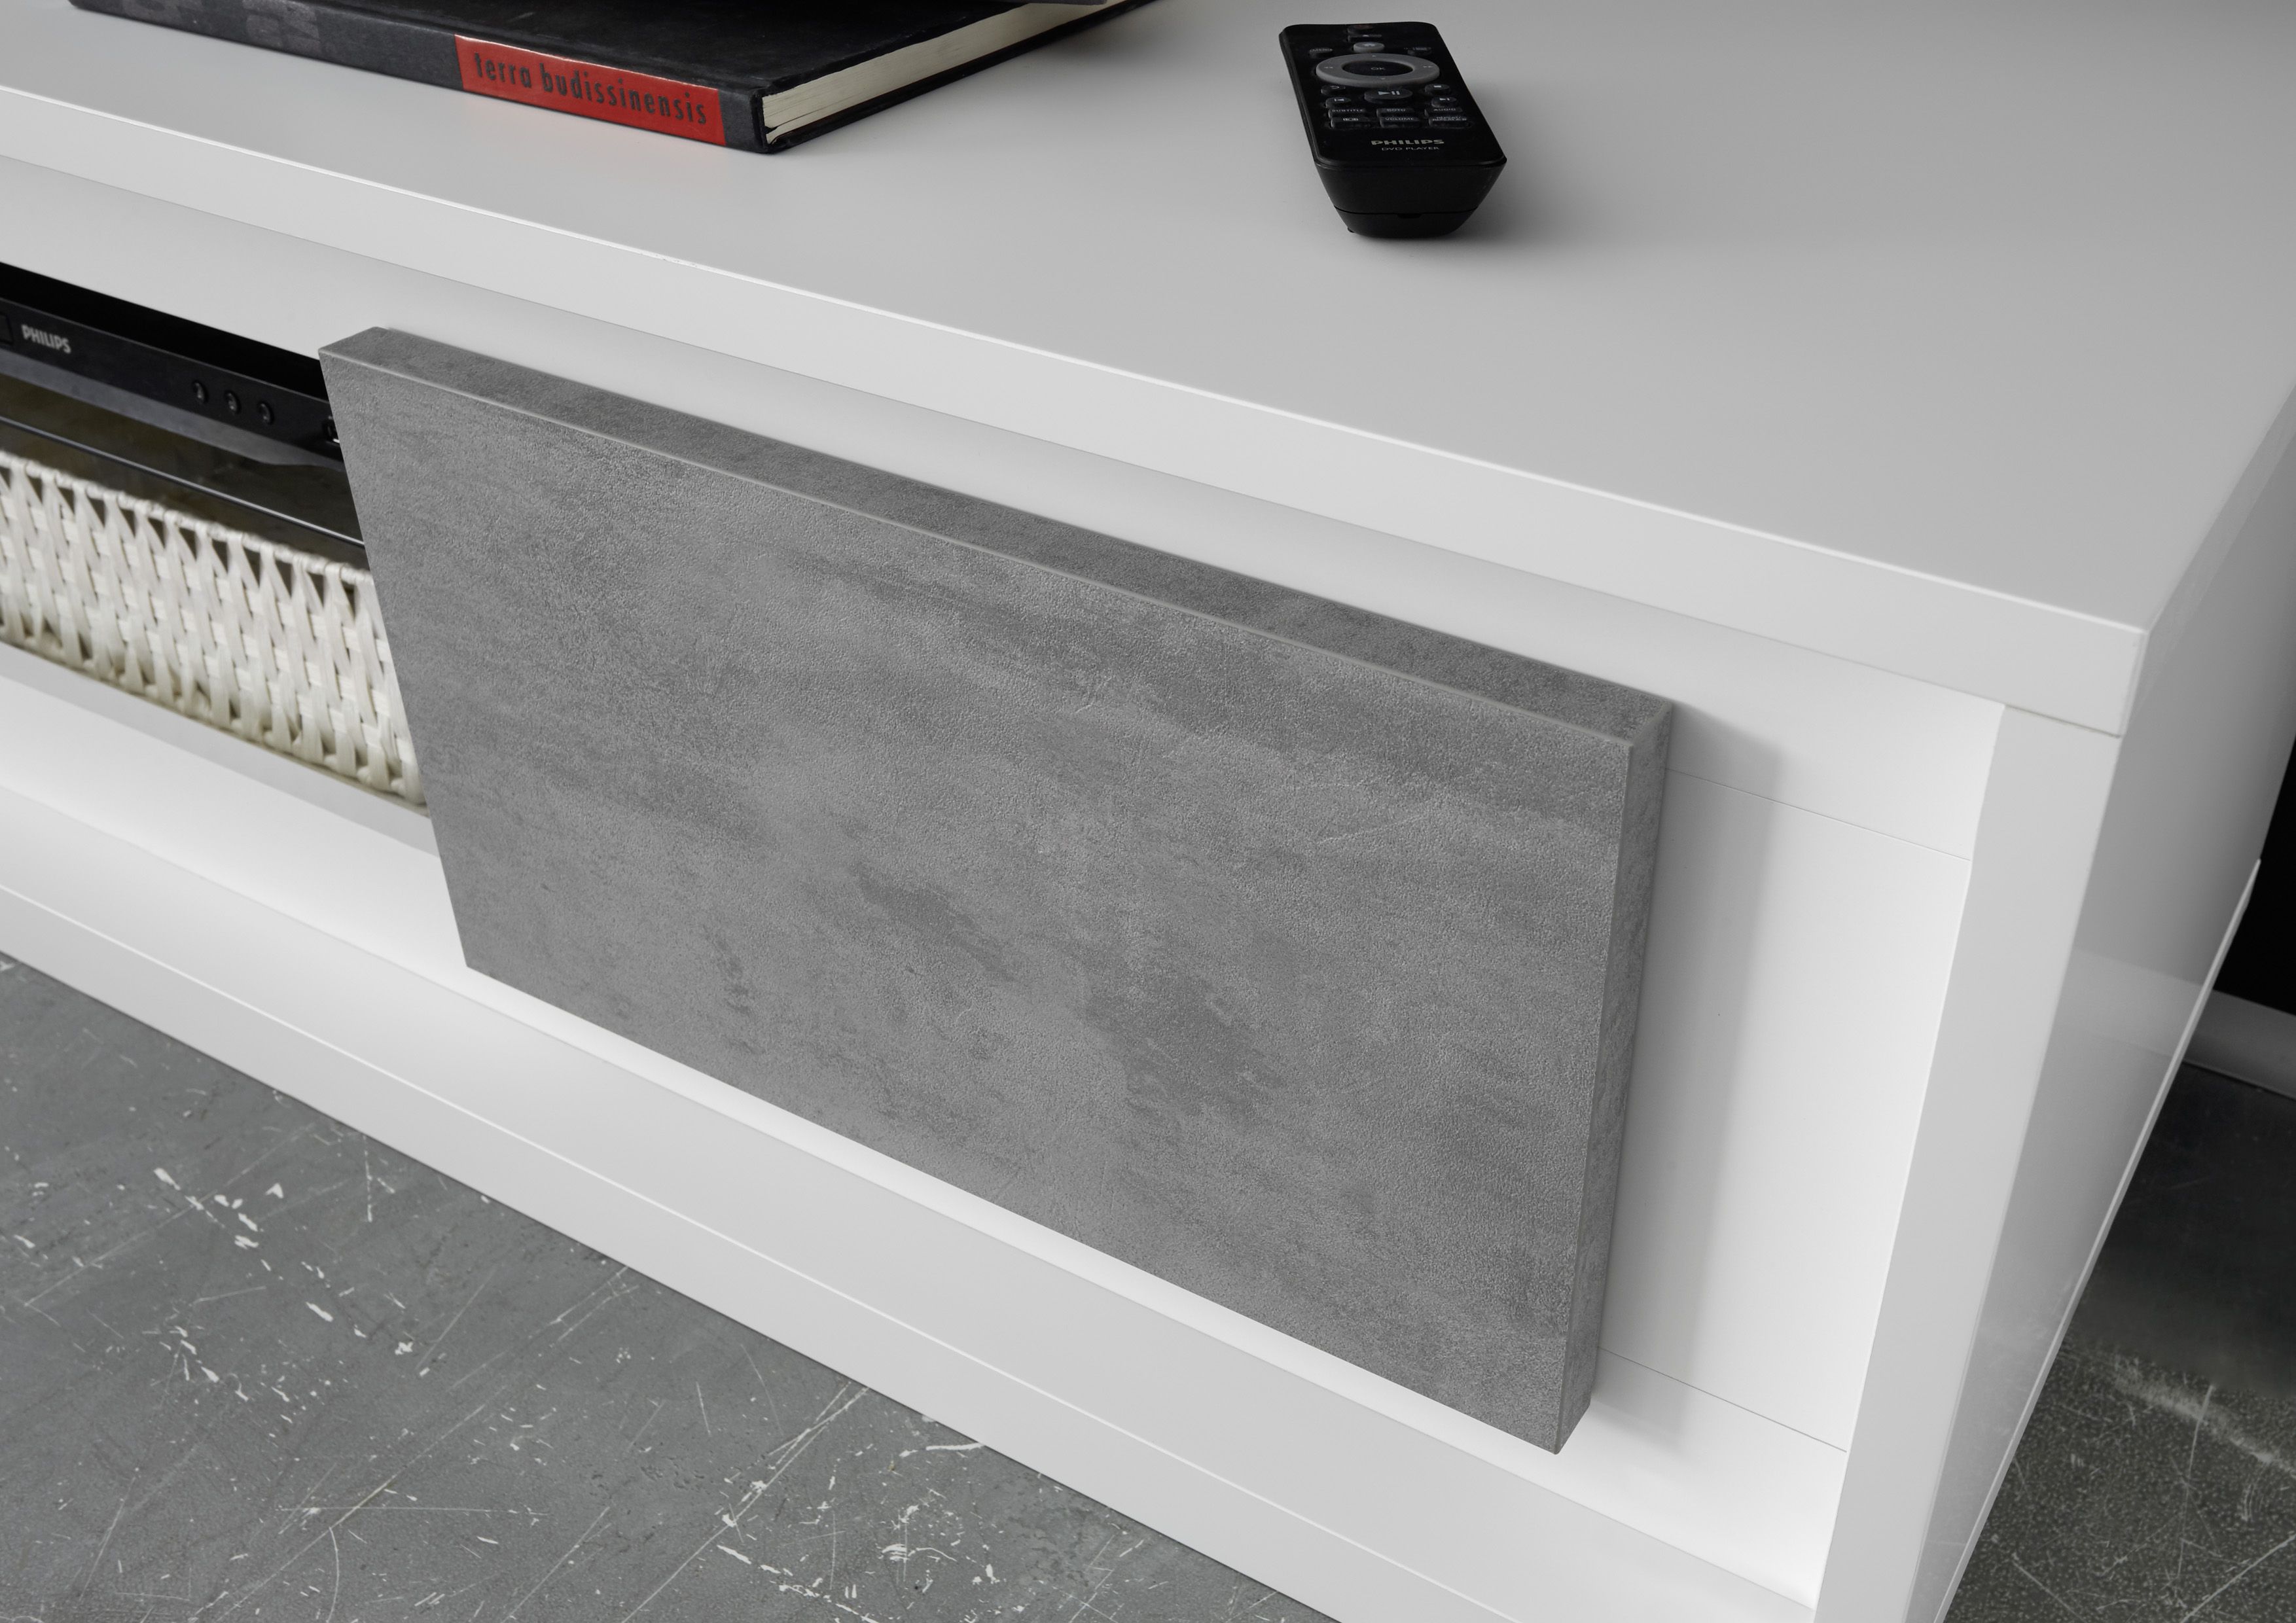 Contemporary Grey and Walnut TV Stand - Click Image to Close